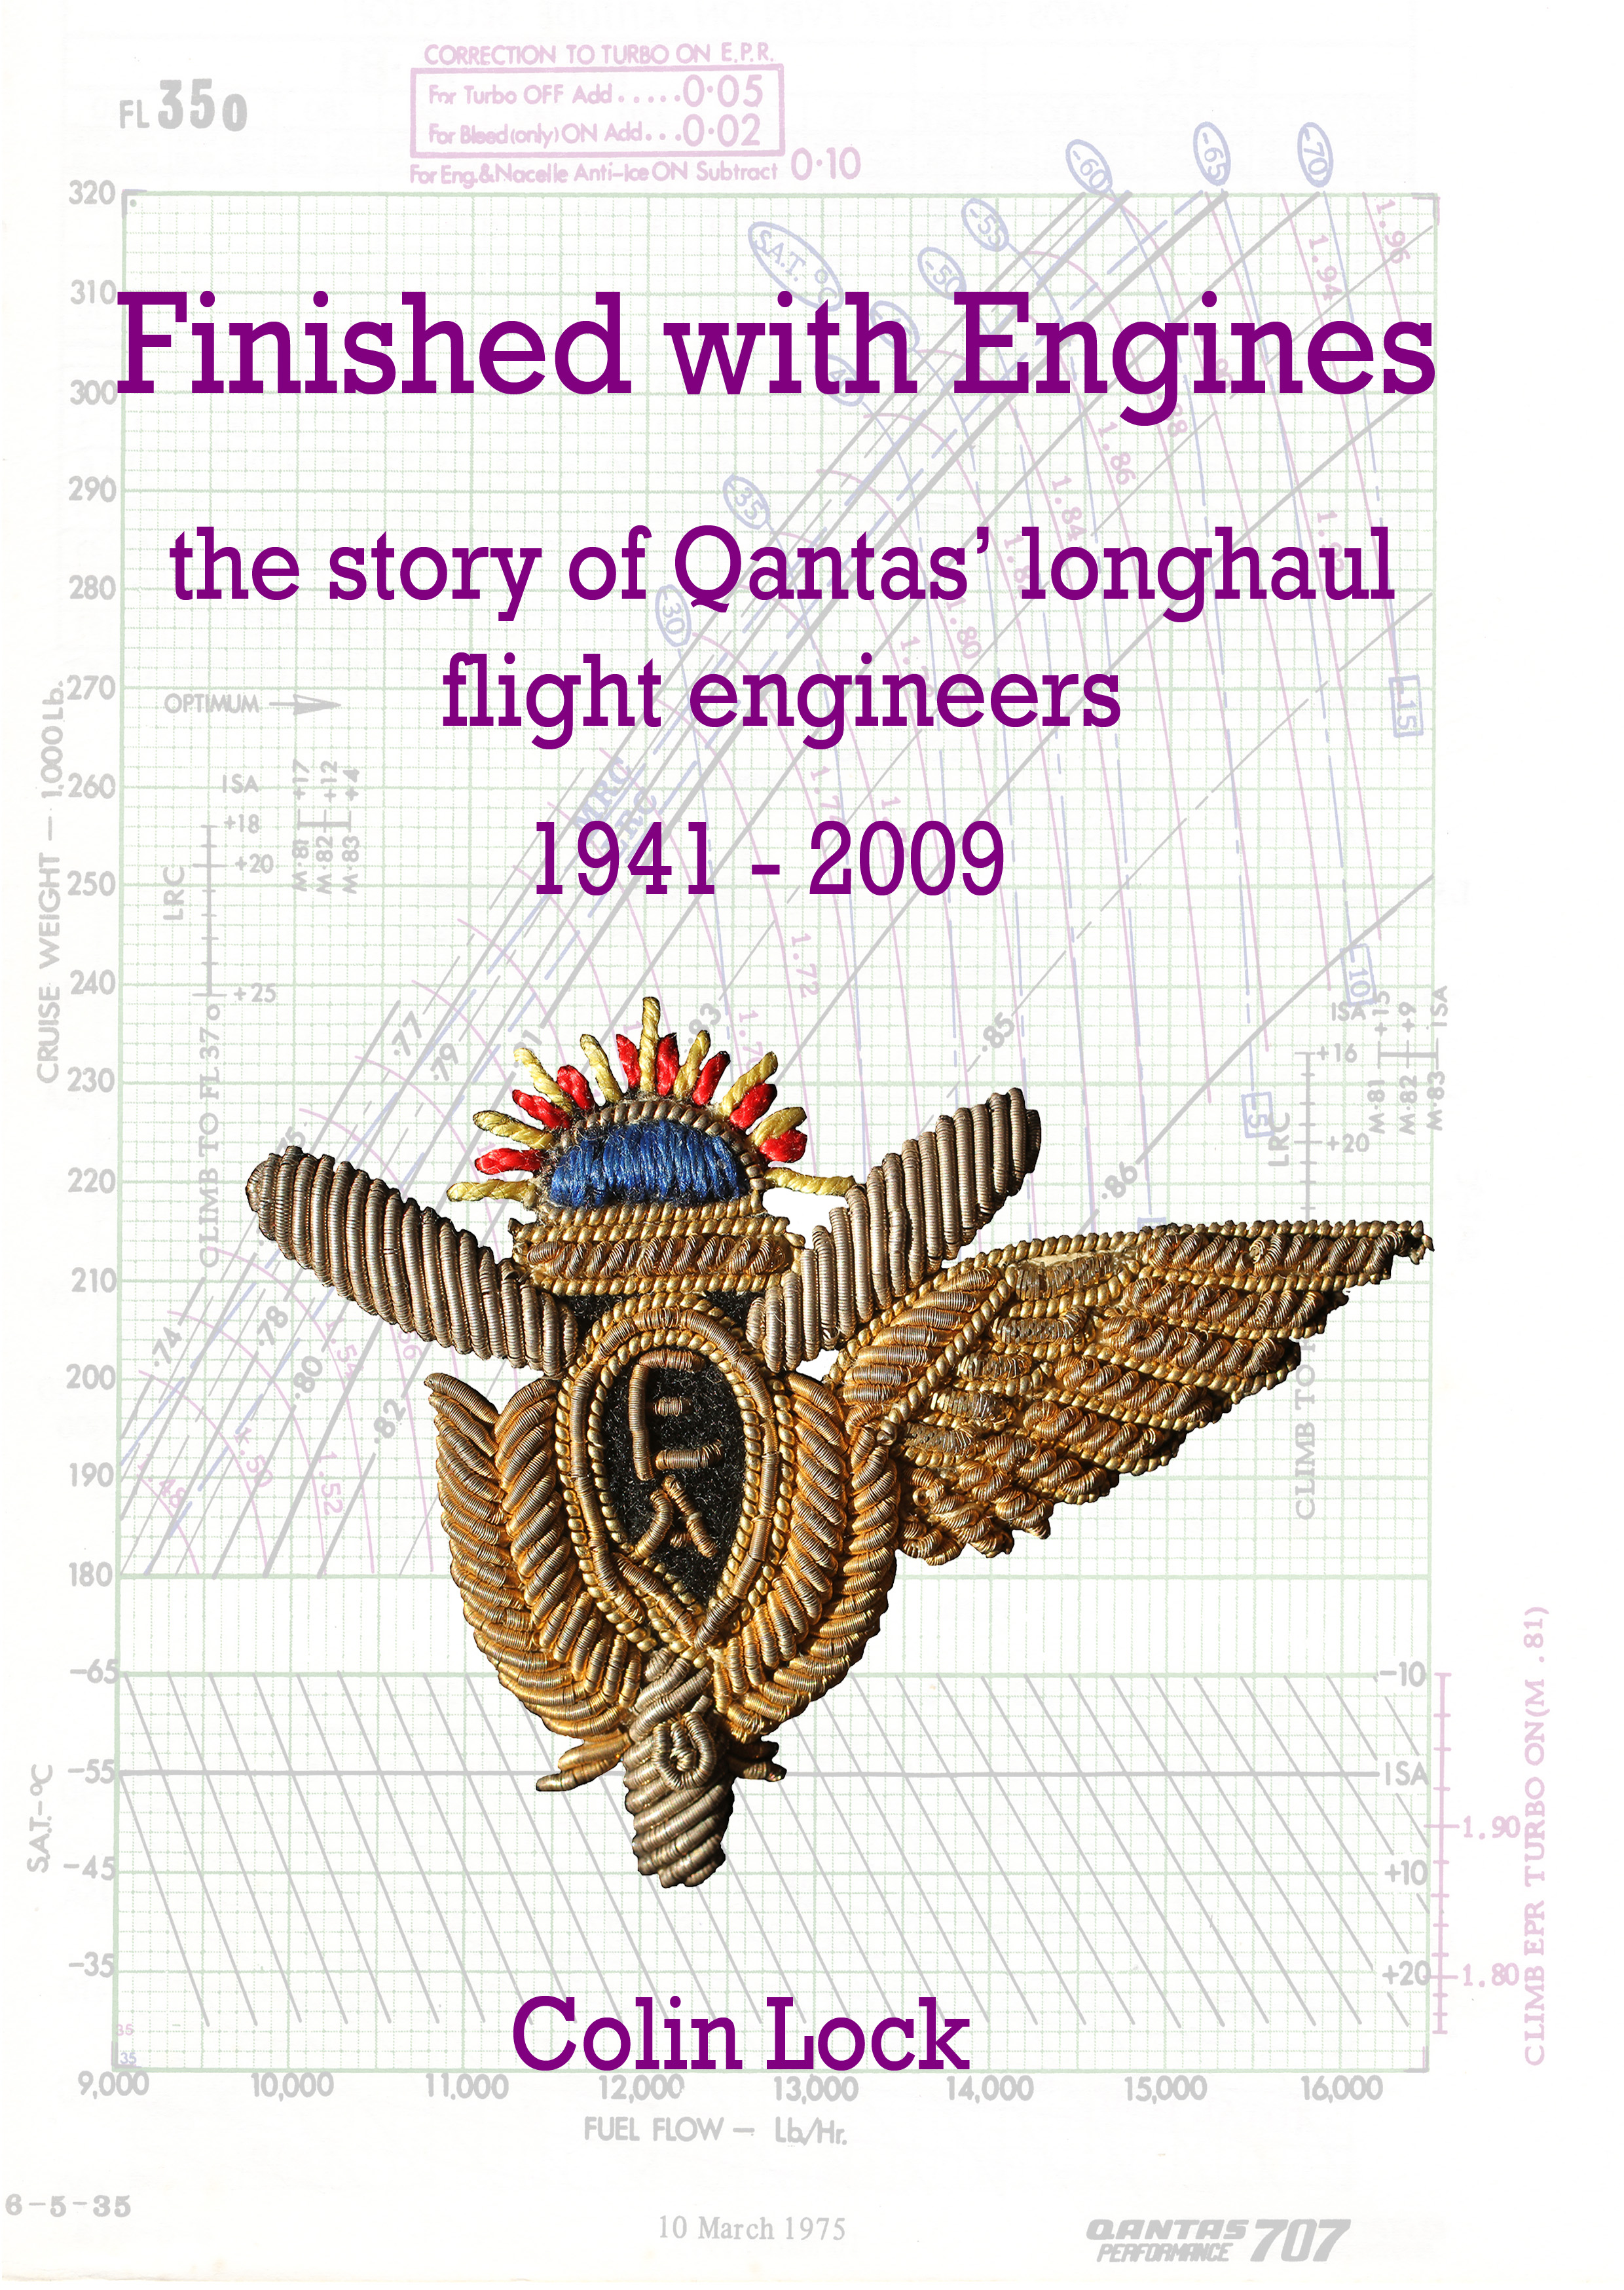 Cover - Finished With Engines by Colin Lock